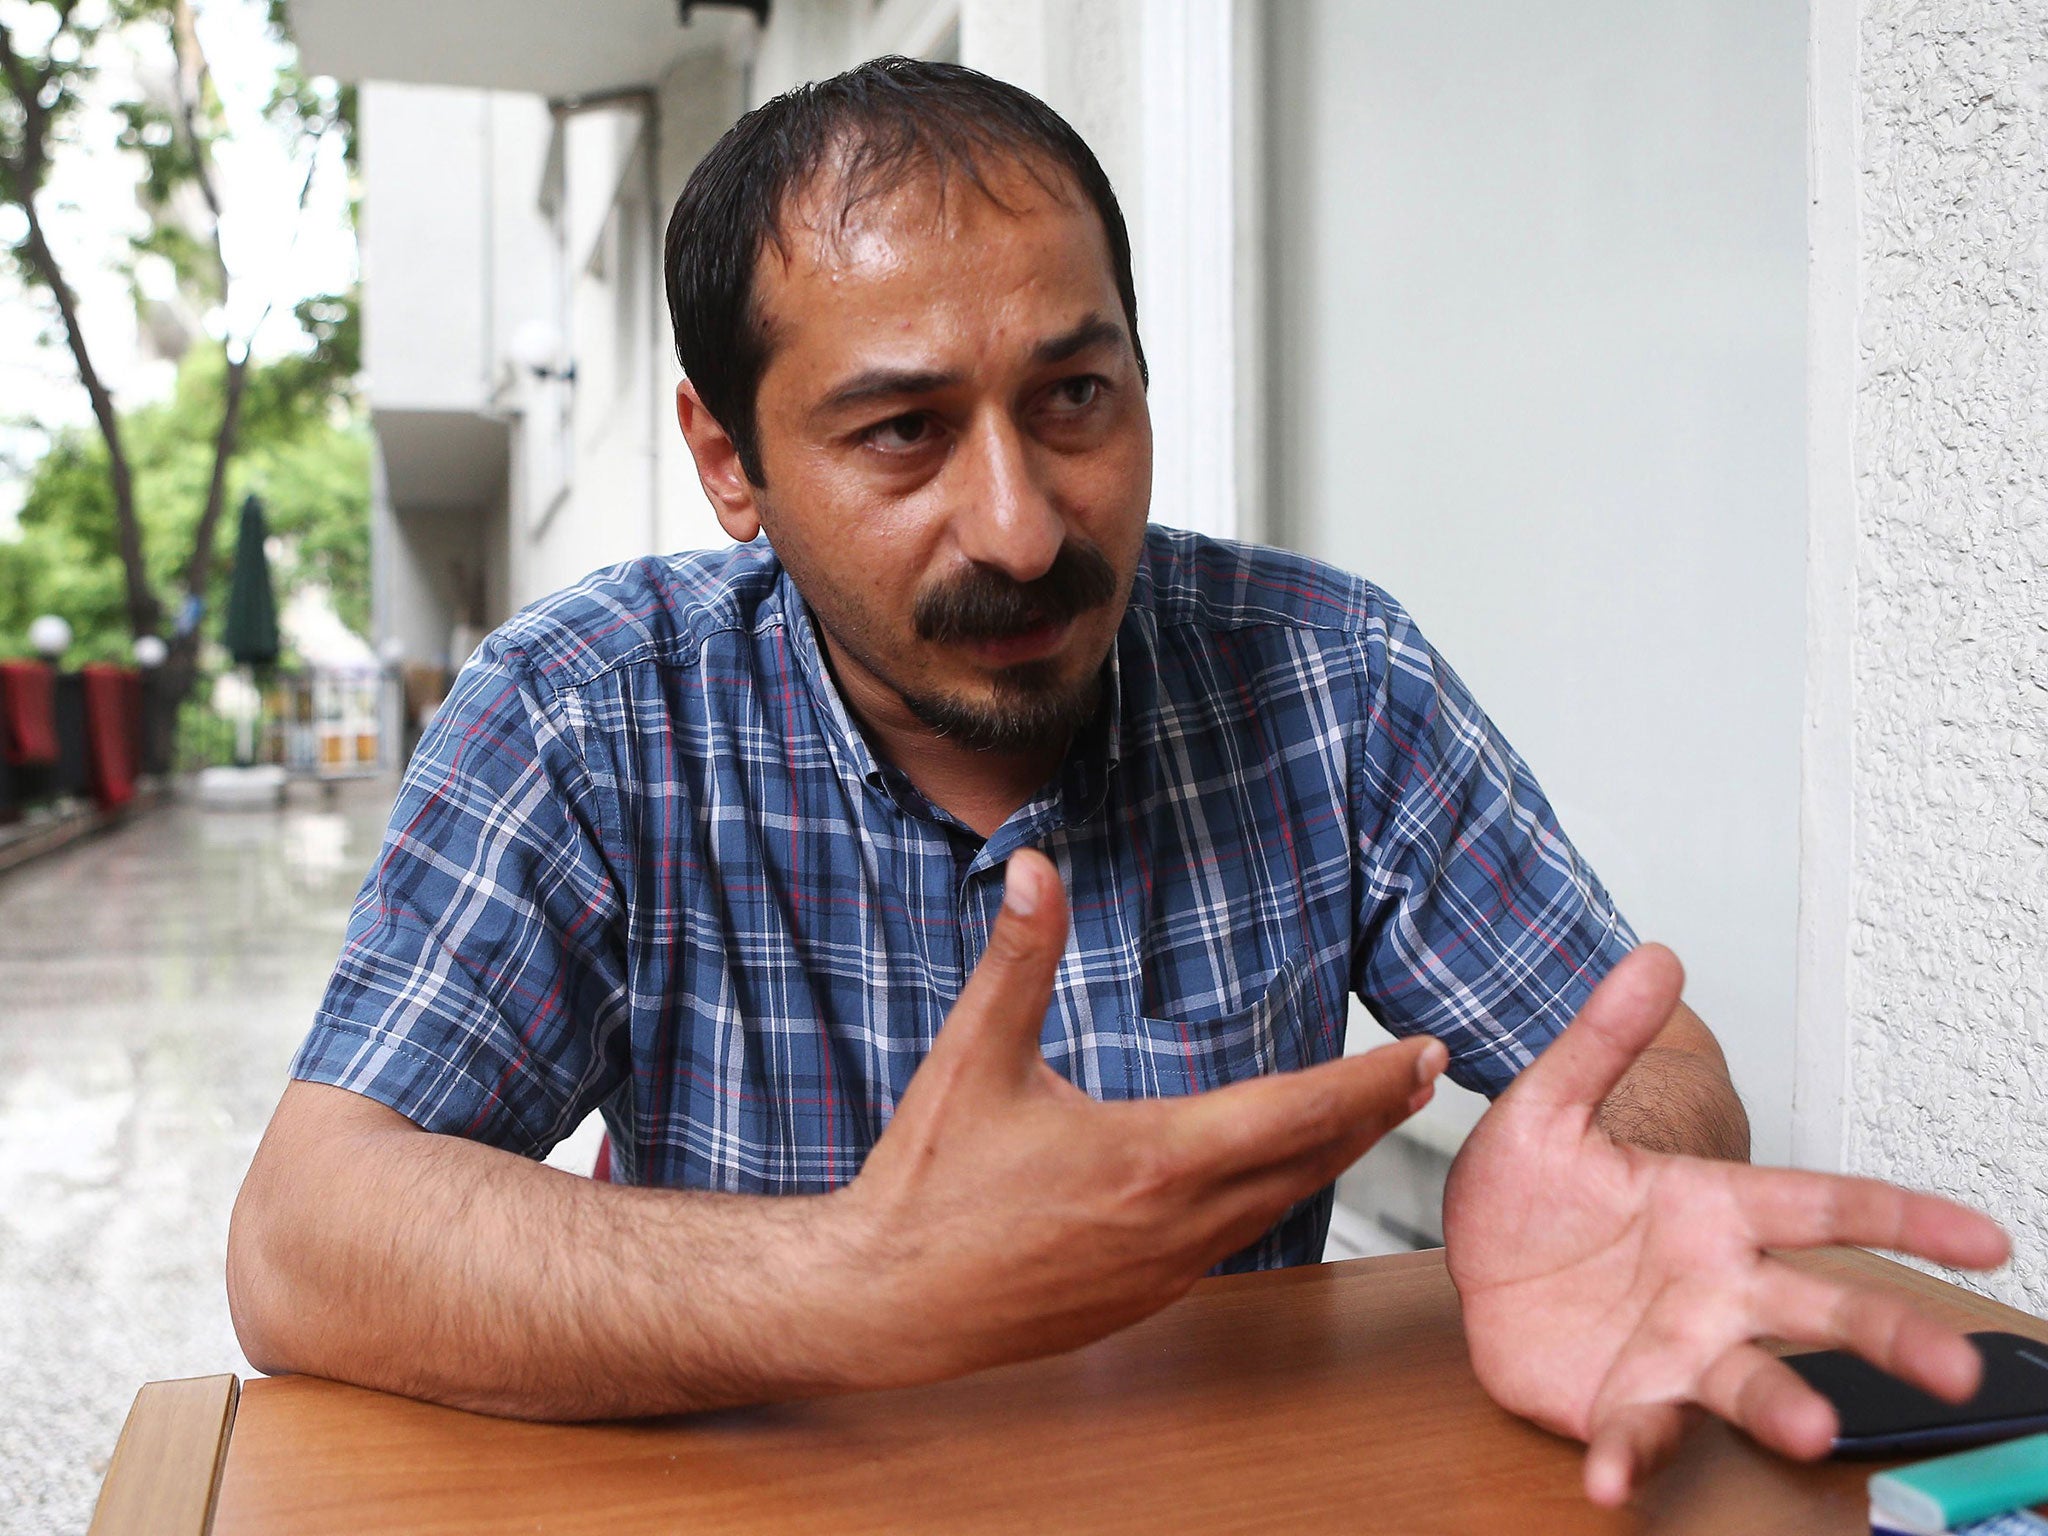 Mustafa Sarisuluk is standing for the People’s Democratic Party in this Sunday’s election in Turkey